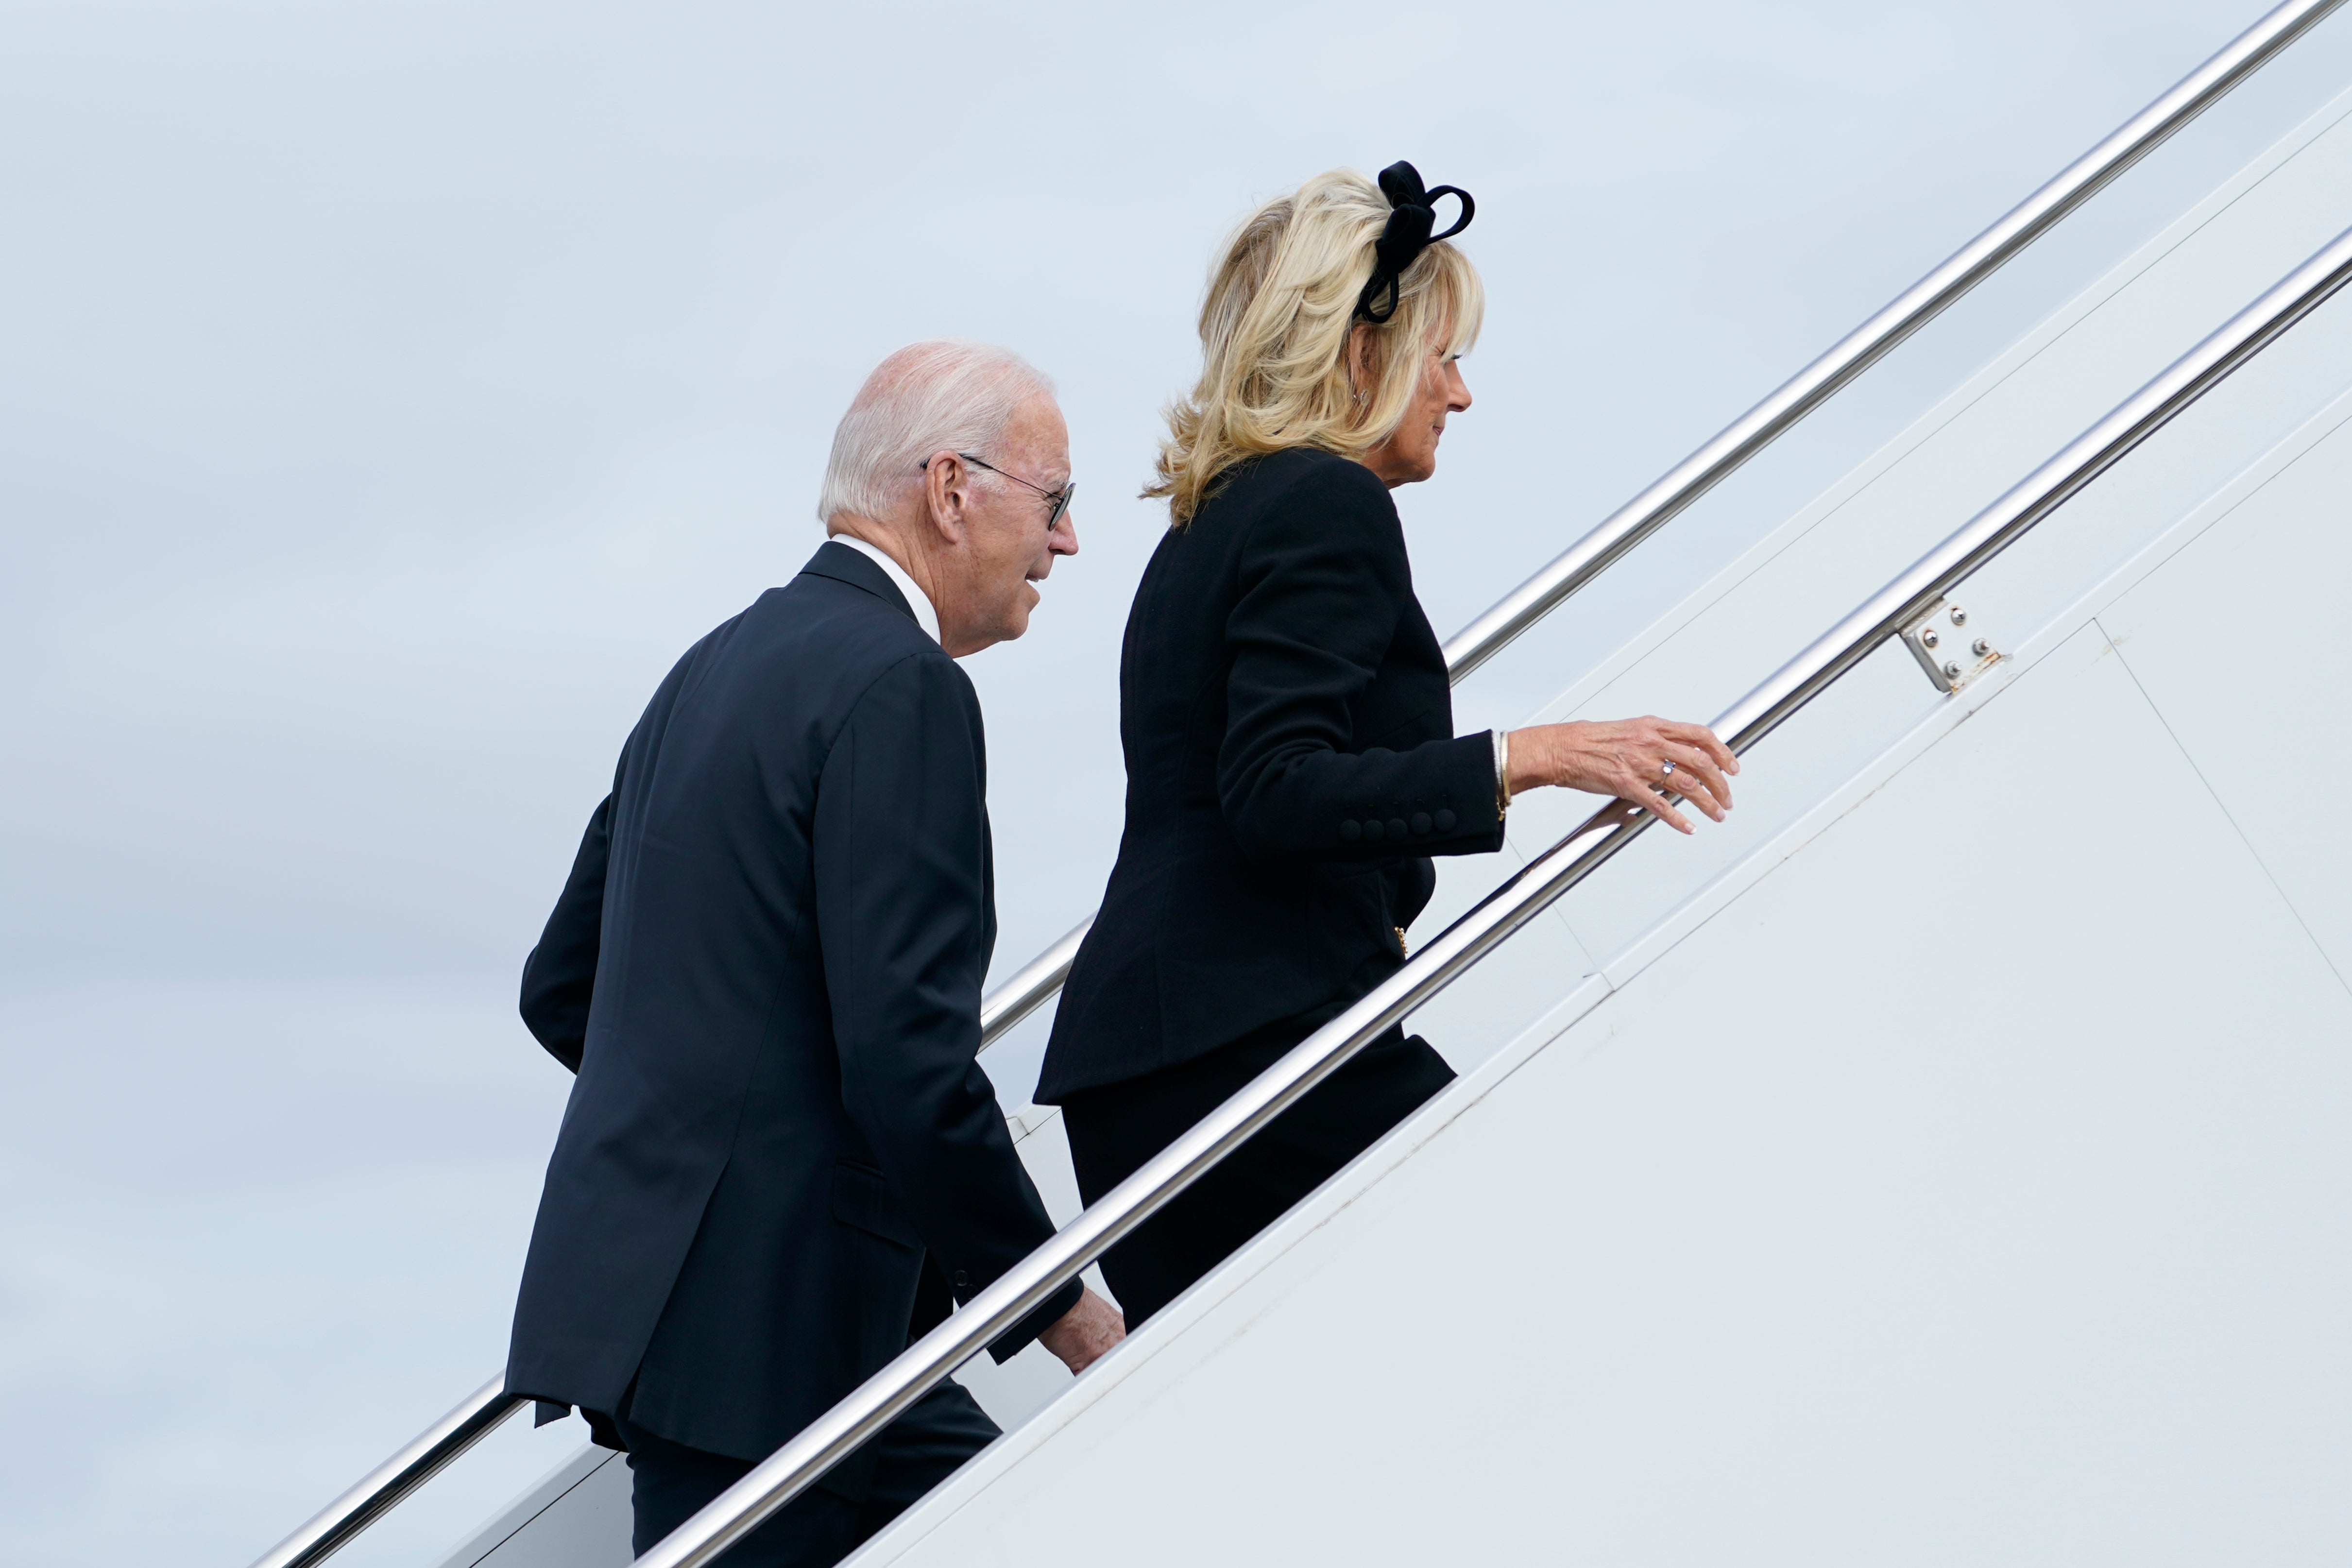 President Joe Biden and first lady Jill Biden walk up the steps of Air Force One at London Stansted Airport, in Stansted, Britain, Monday, Sept. 19, 2022. The Bidens were in London to attend the funeral for Queen Elizabeth II. (AP Photo/Susan Walsh)